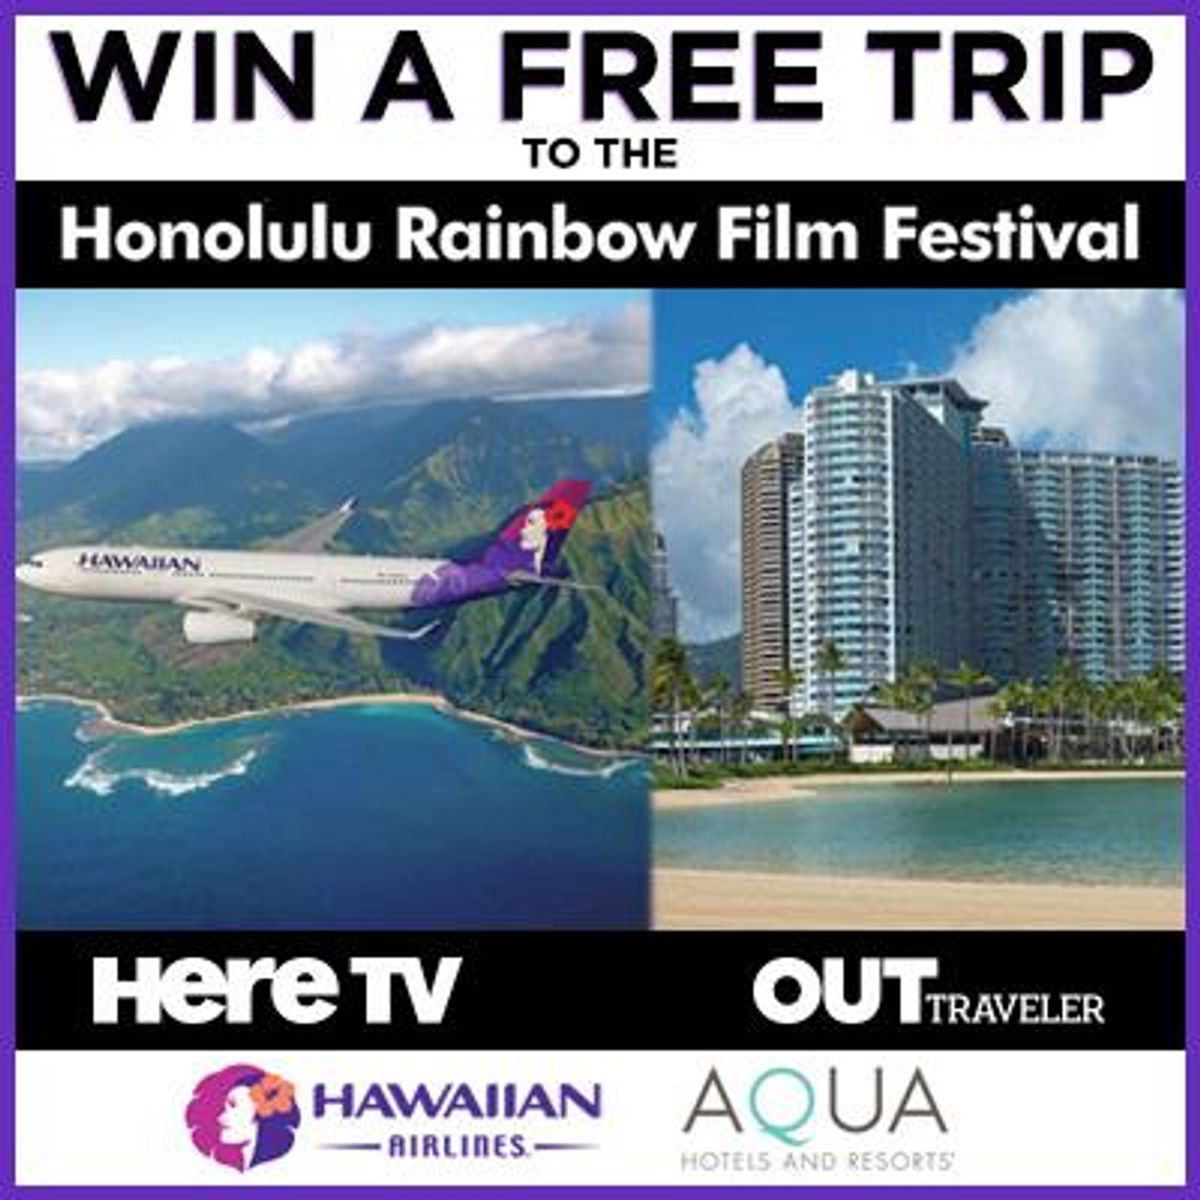 Enter to Win a Free Trip to Hawaii